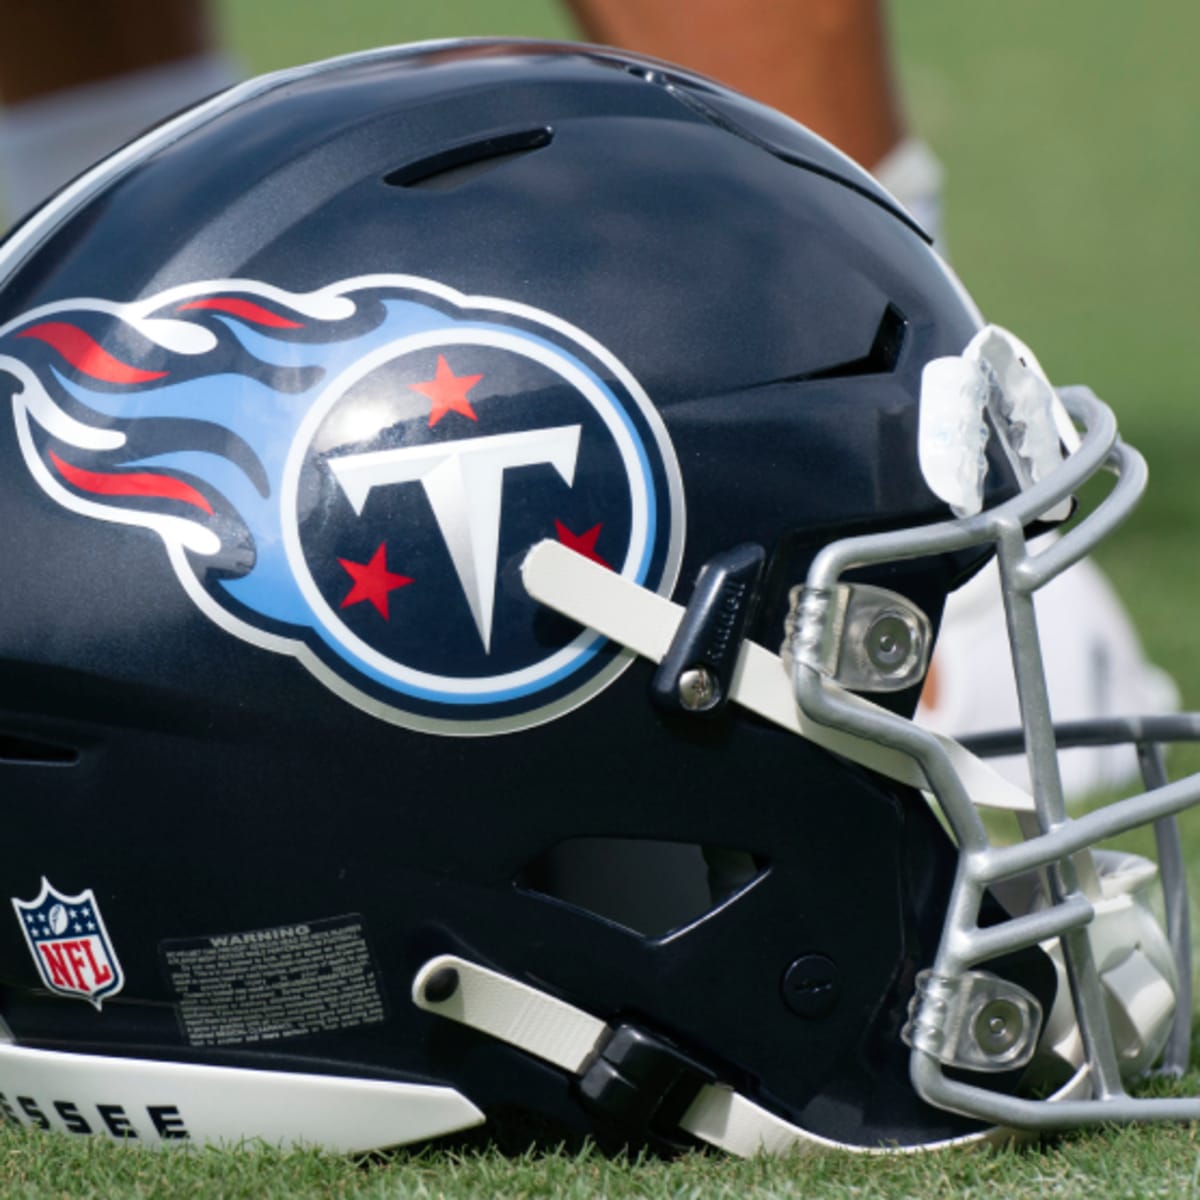 Tennessee Titans new uniforms revealed